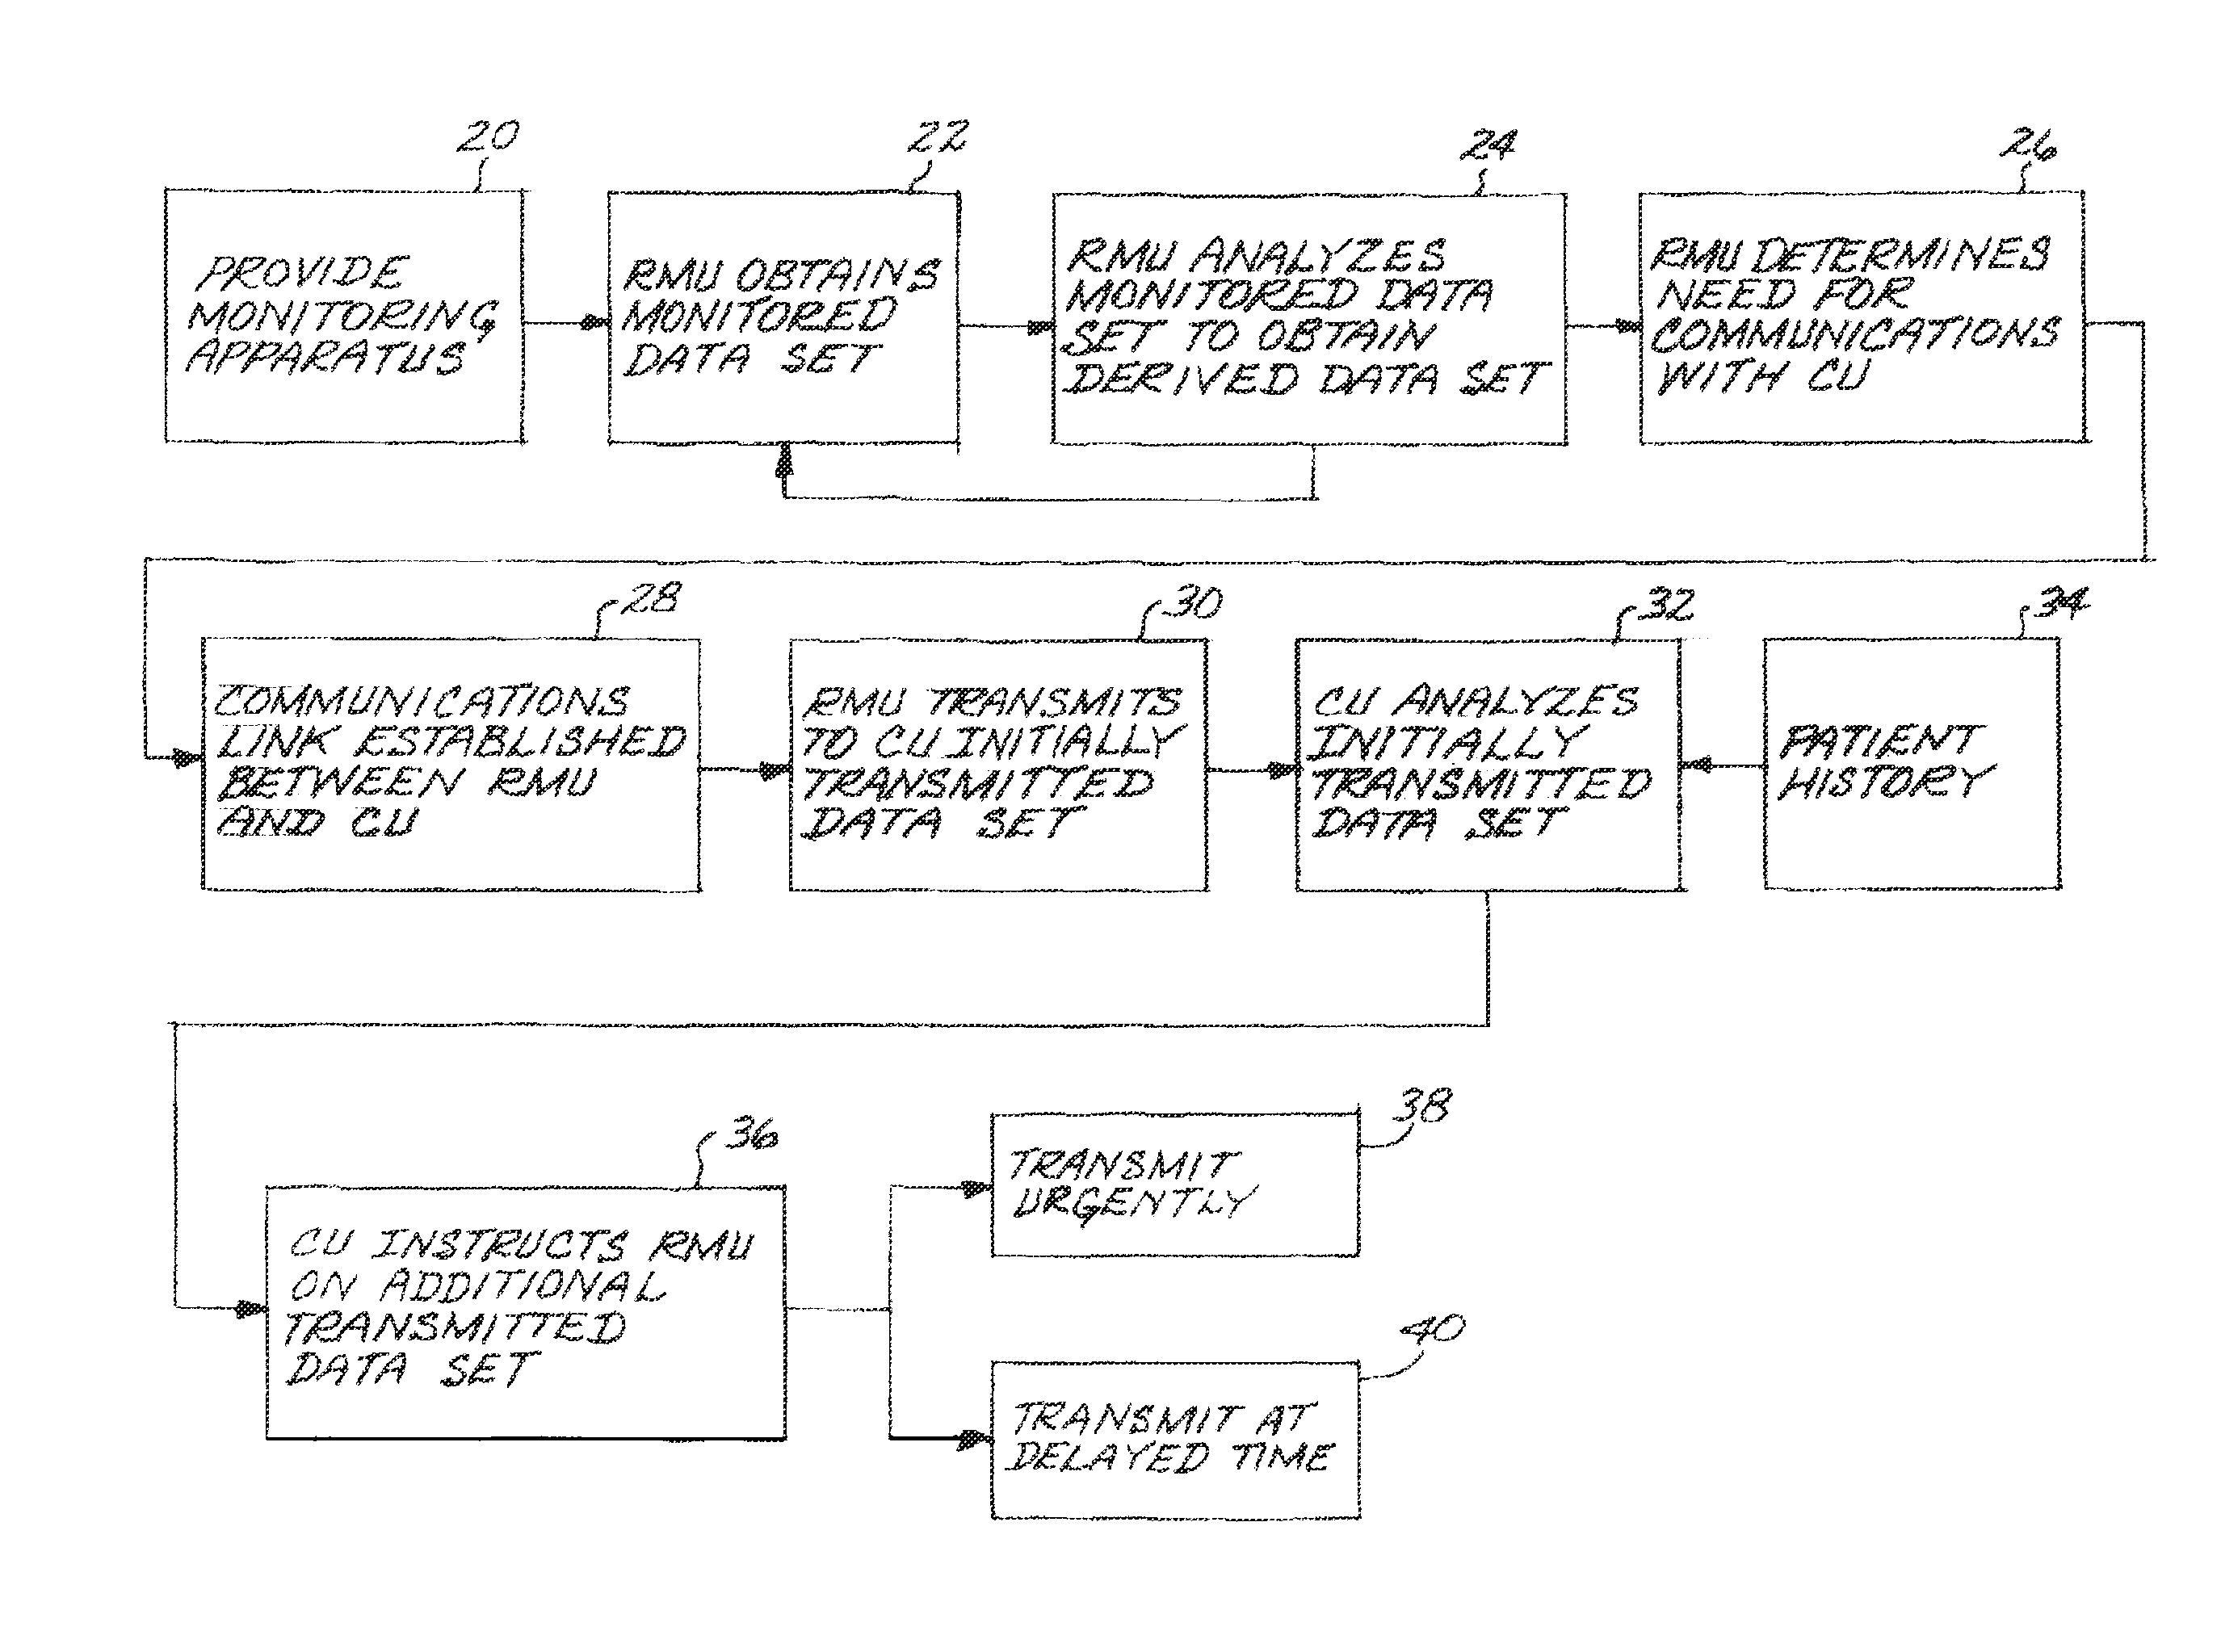 Control of data transmission between a remote monitoring unit and a central unit